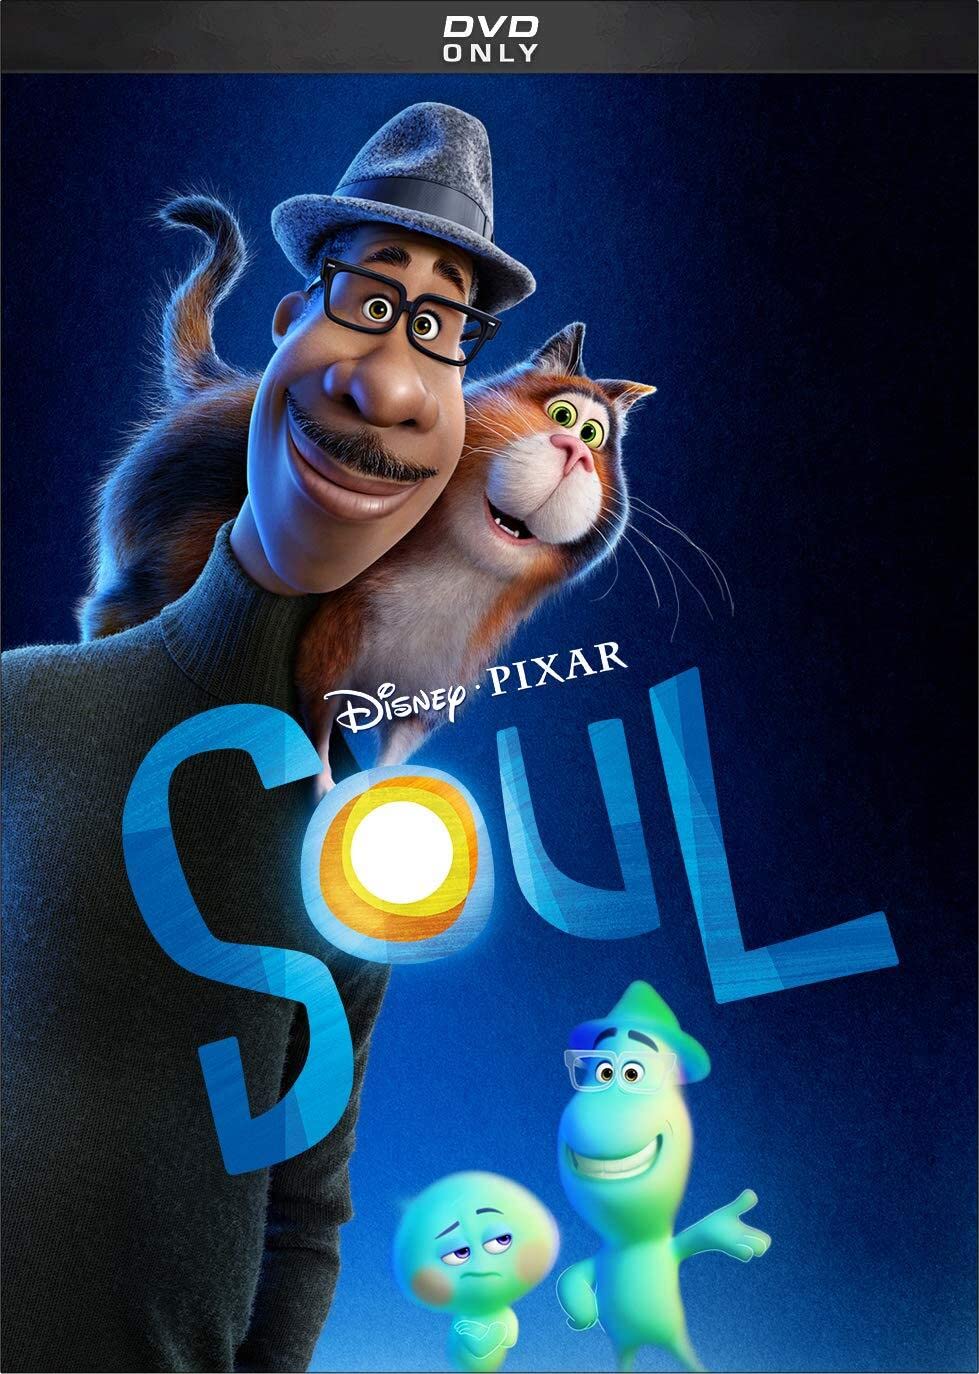 Cover of DVD Soul with animated character pictures